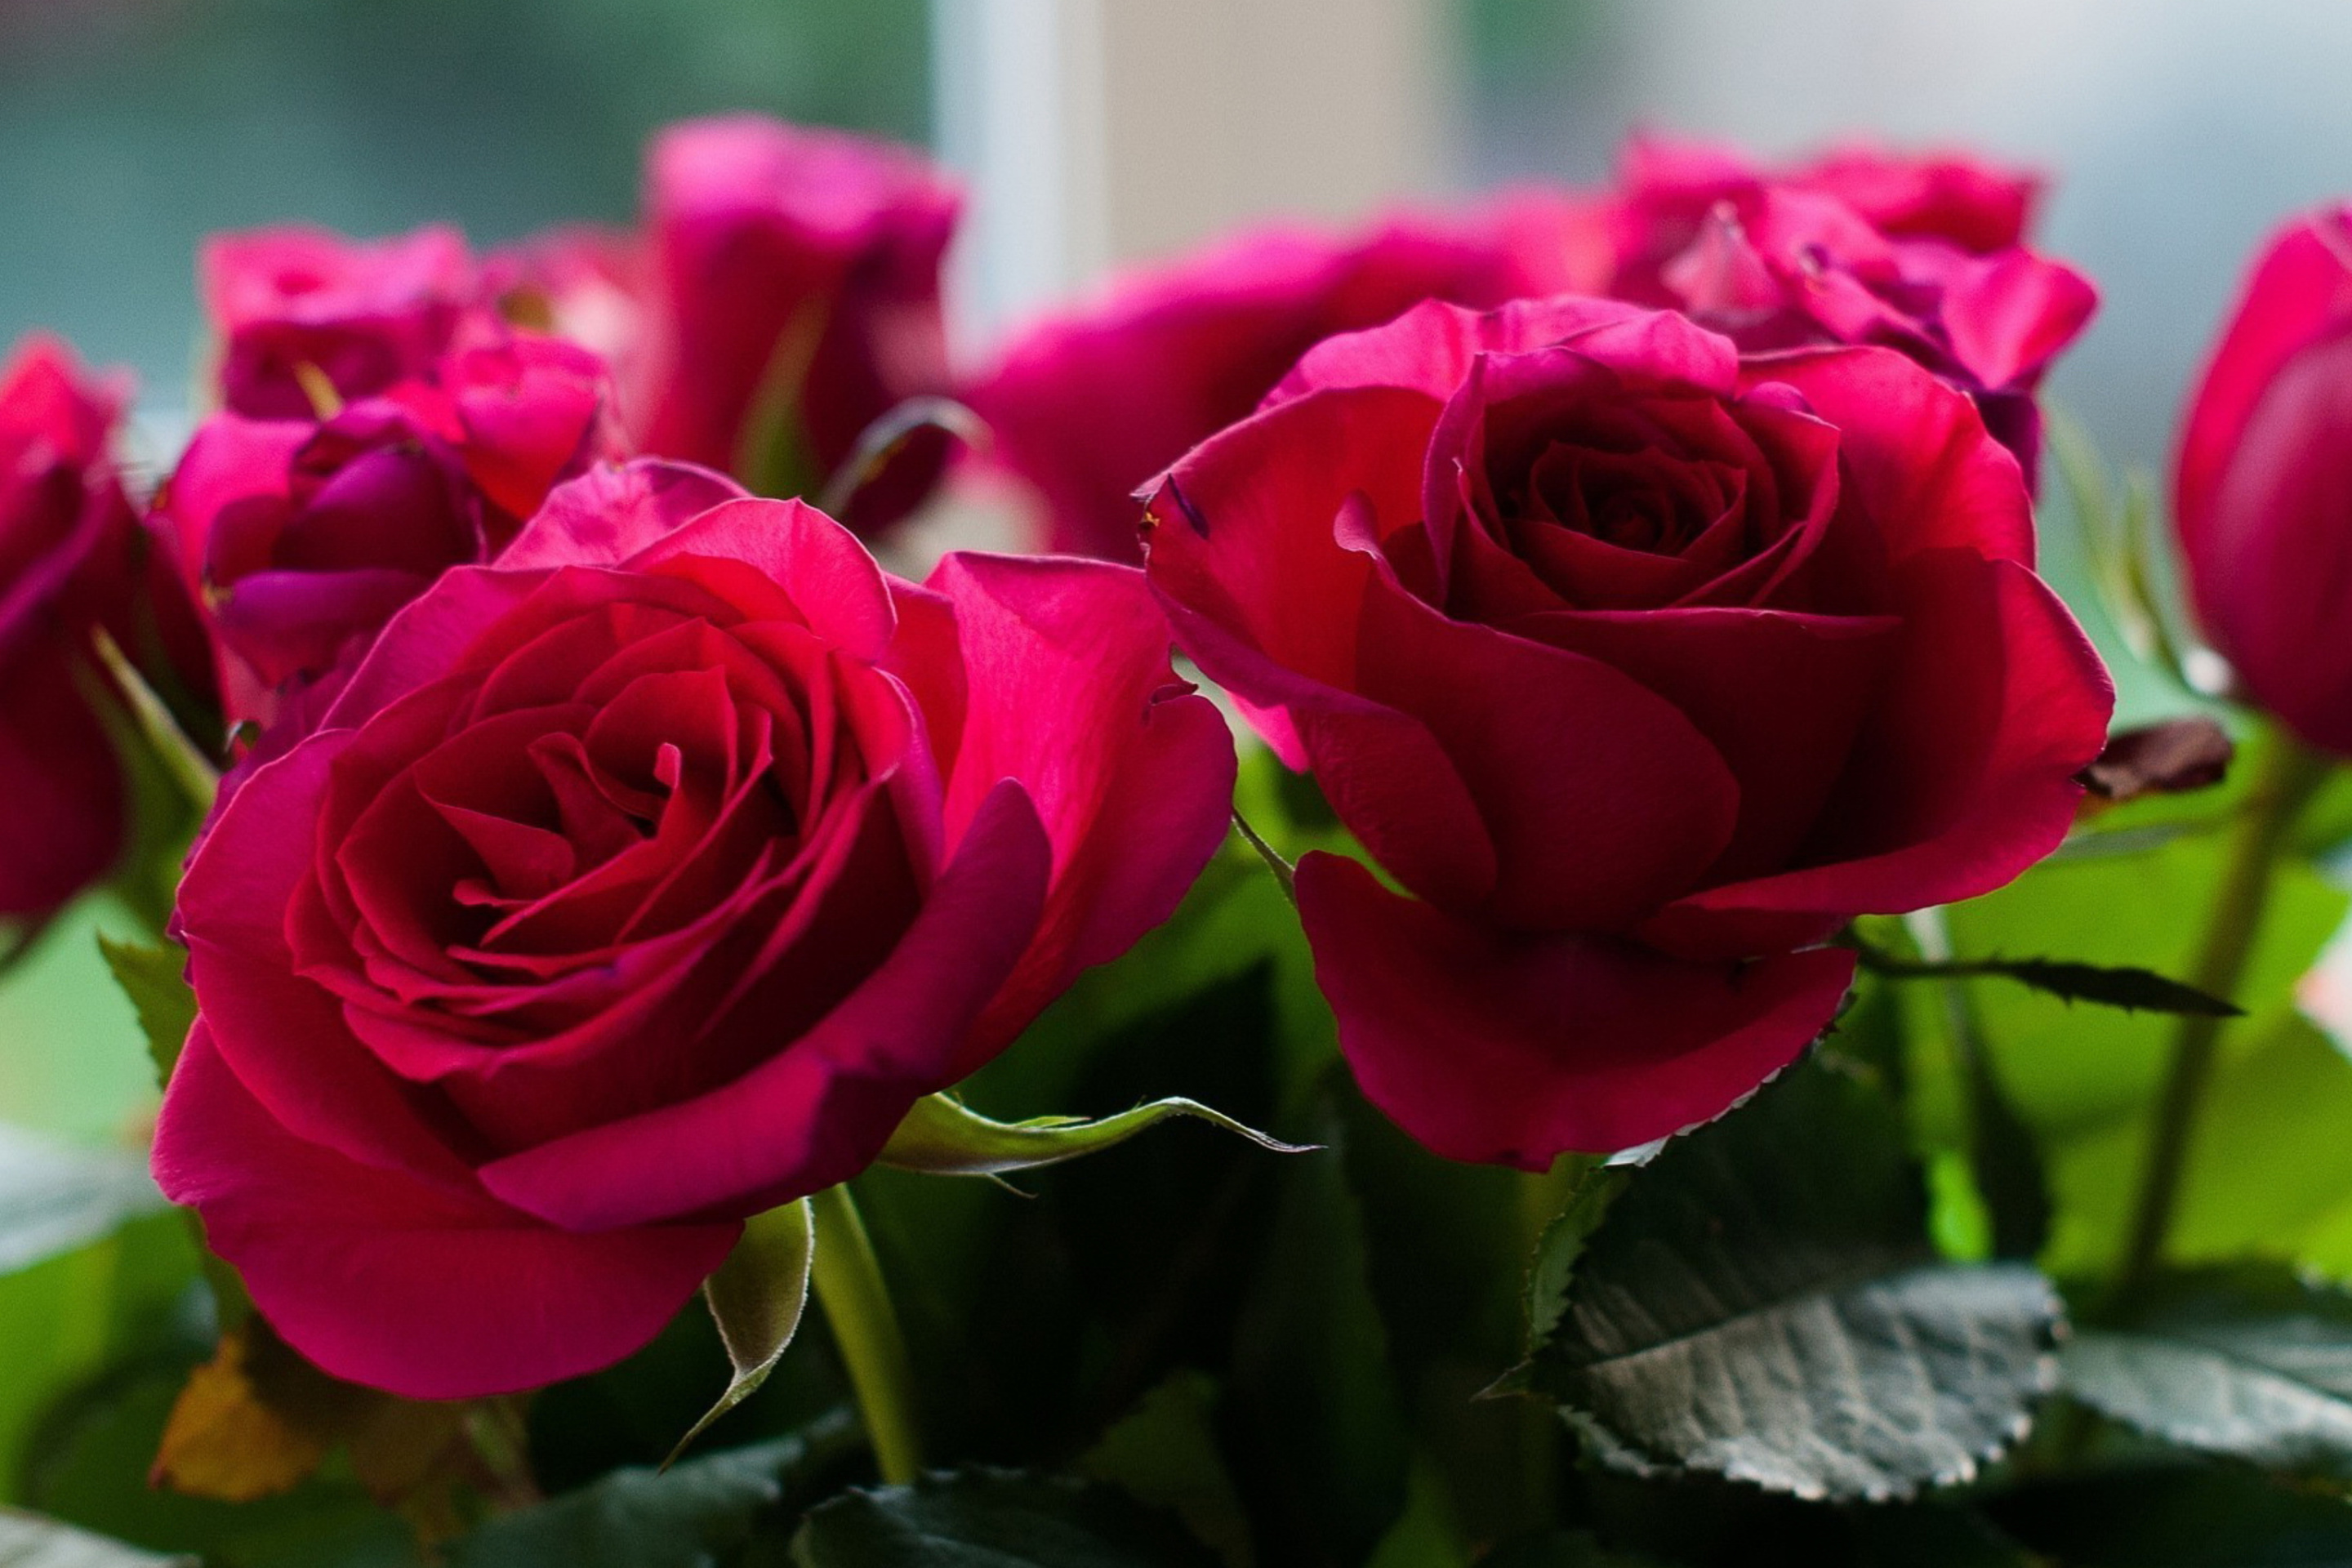 Picture of bouquet of roses from garden screenshot #1 2880x1920